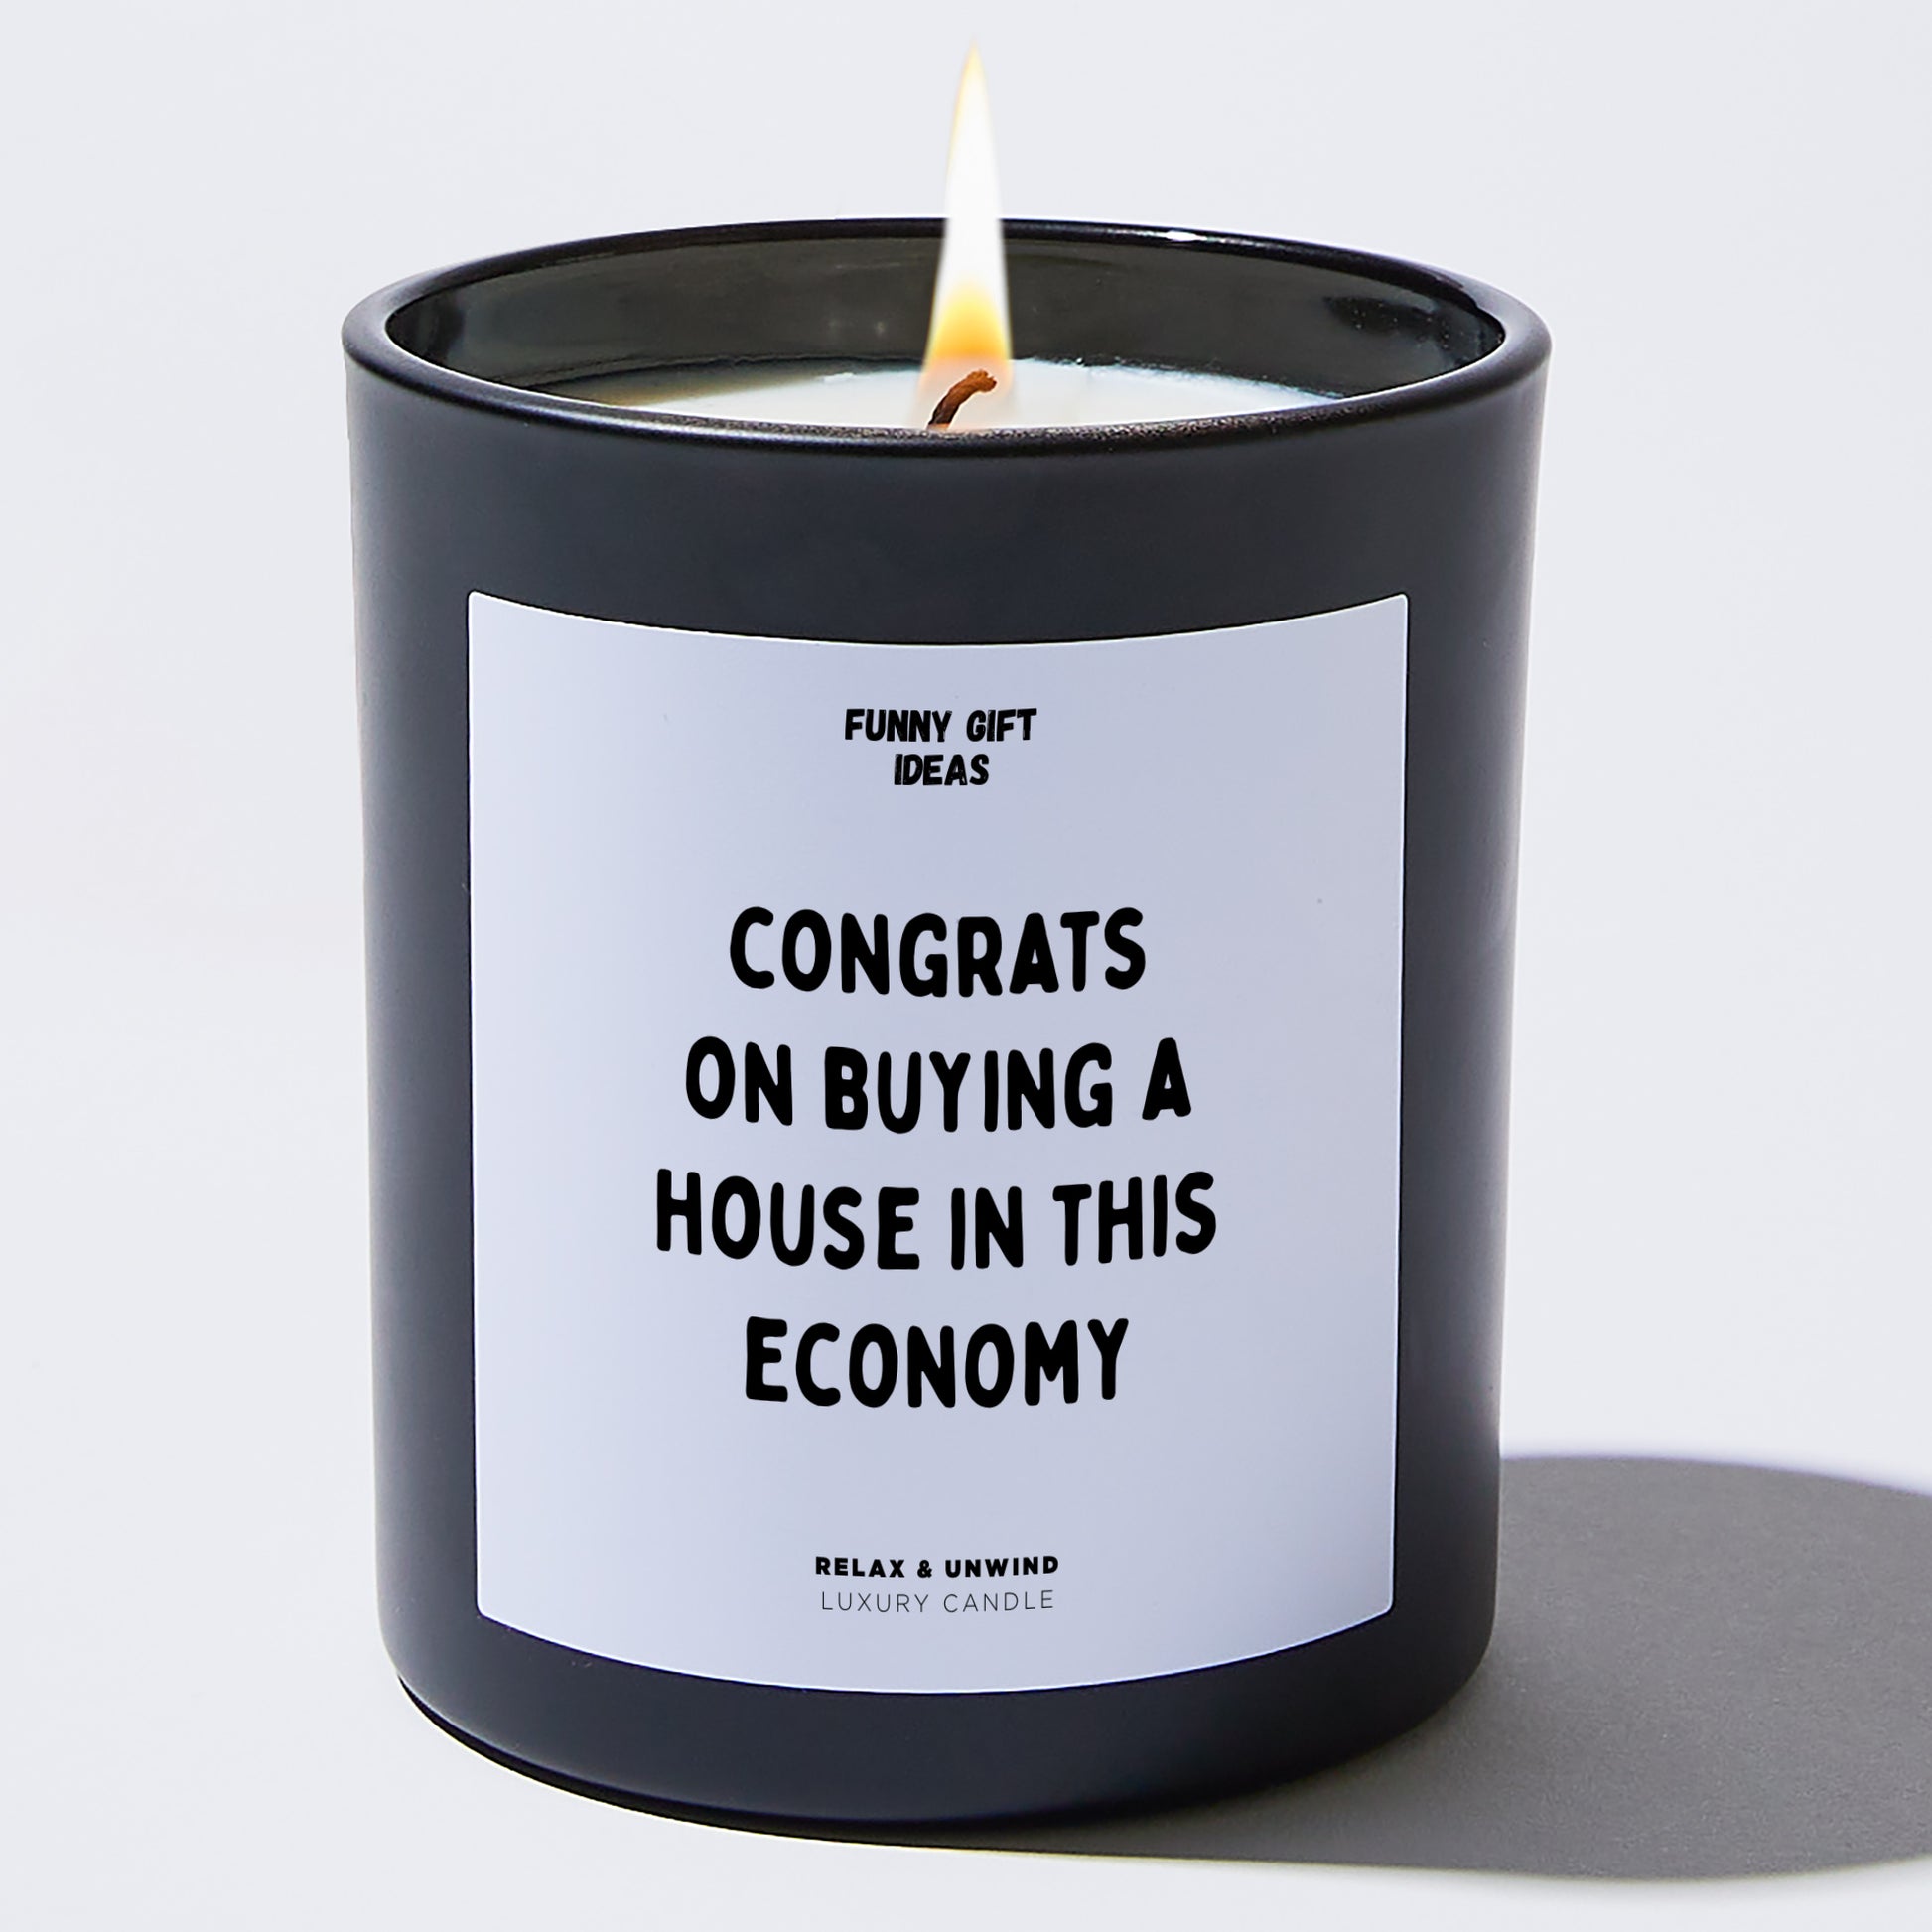 Unique Housewarming Gift Congrats On Buying A House In This Economy - Funny Gift Ideas